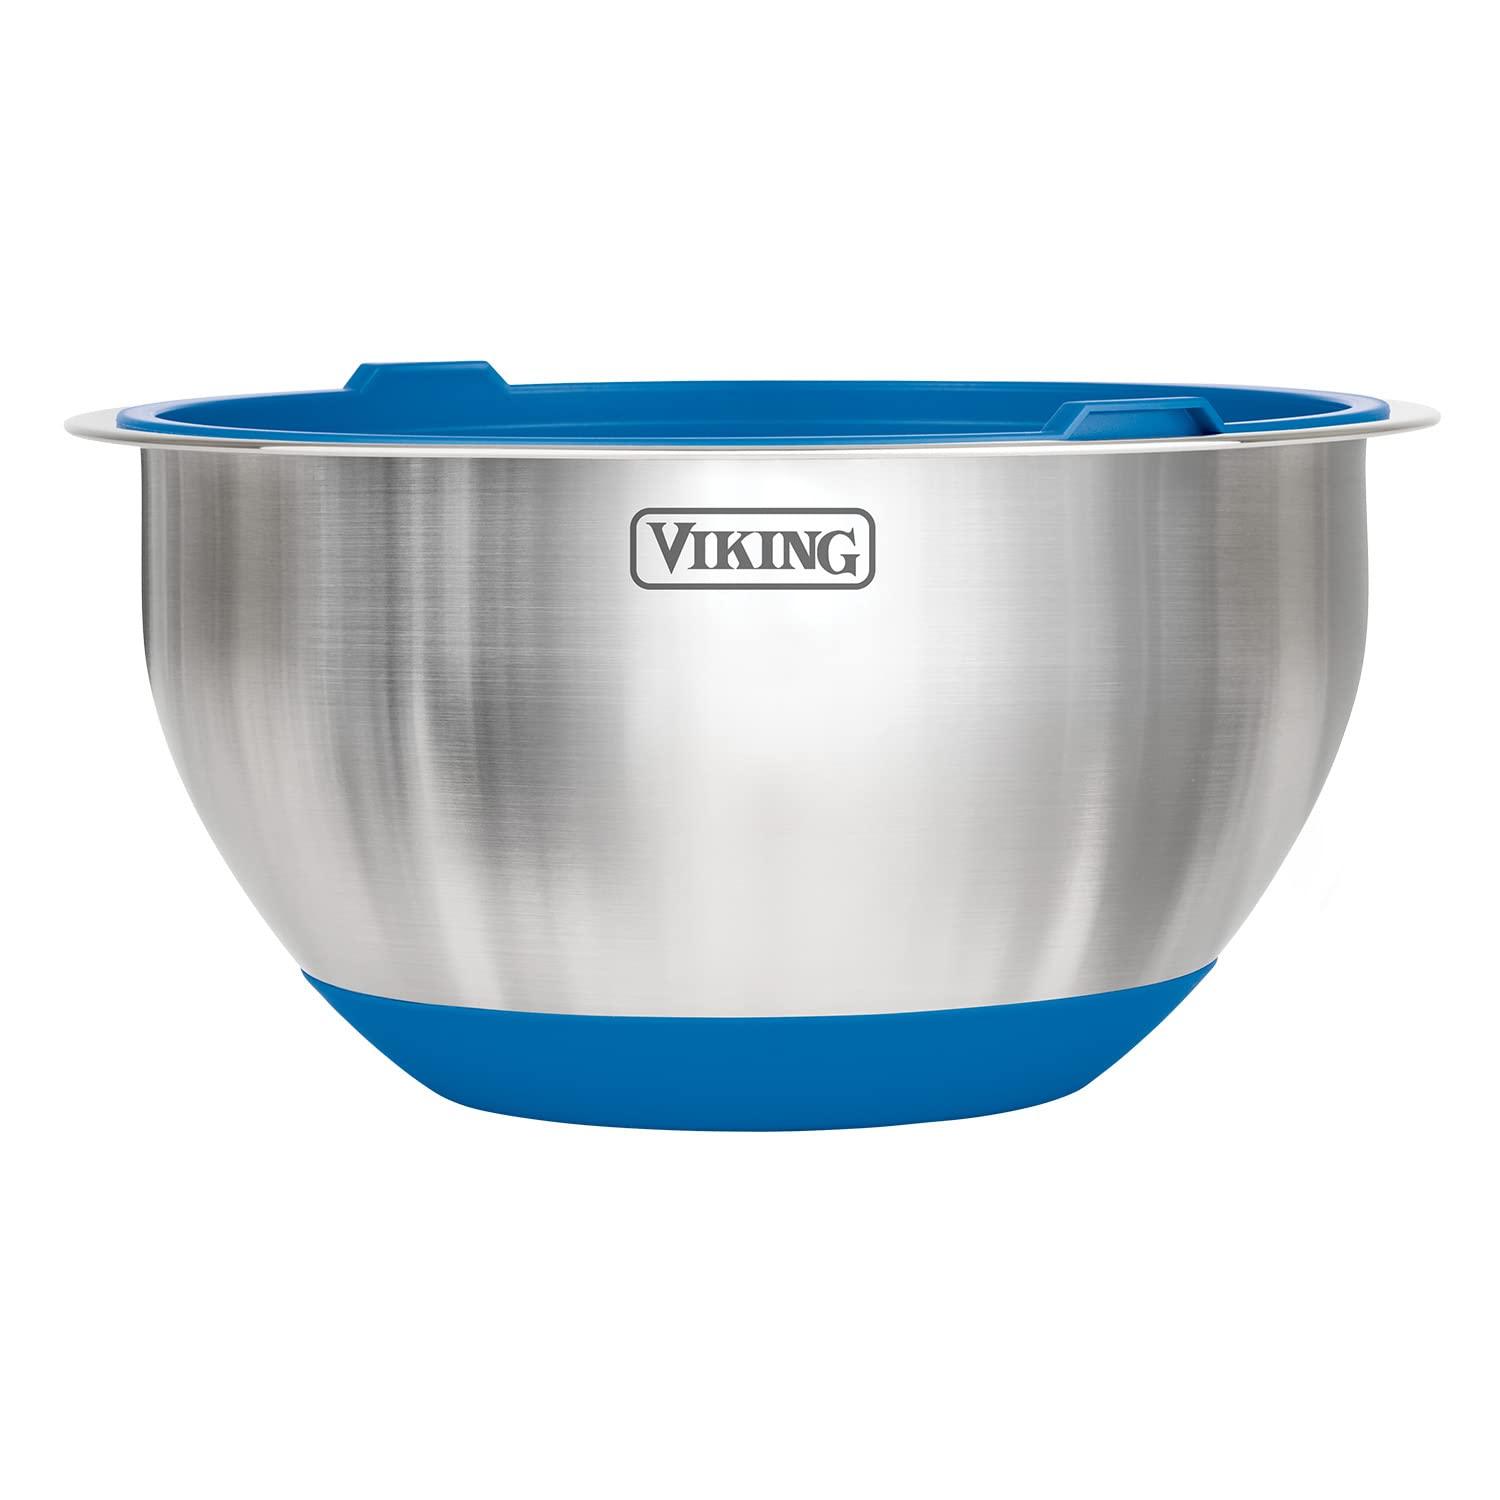 VIKING Culinary Stainless Steel Mixing Bowl Set, 10 piece, Non-slip Silicone Base, Includes Airtight Lids, Dishwasher Safe, Blue - CookCave